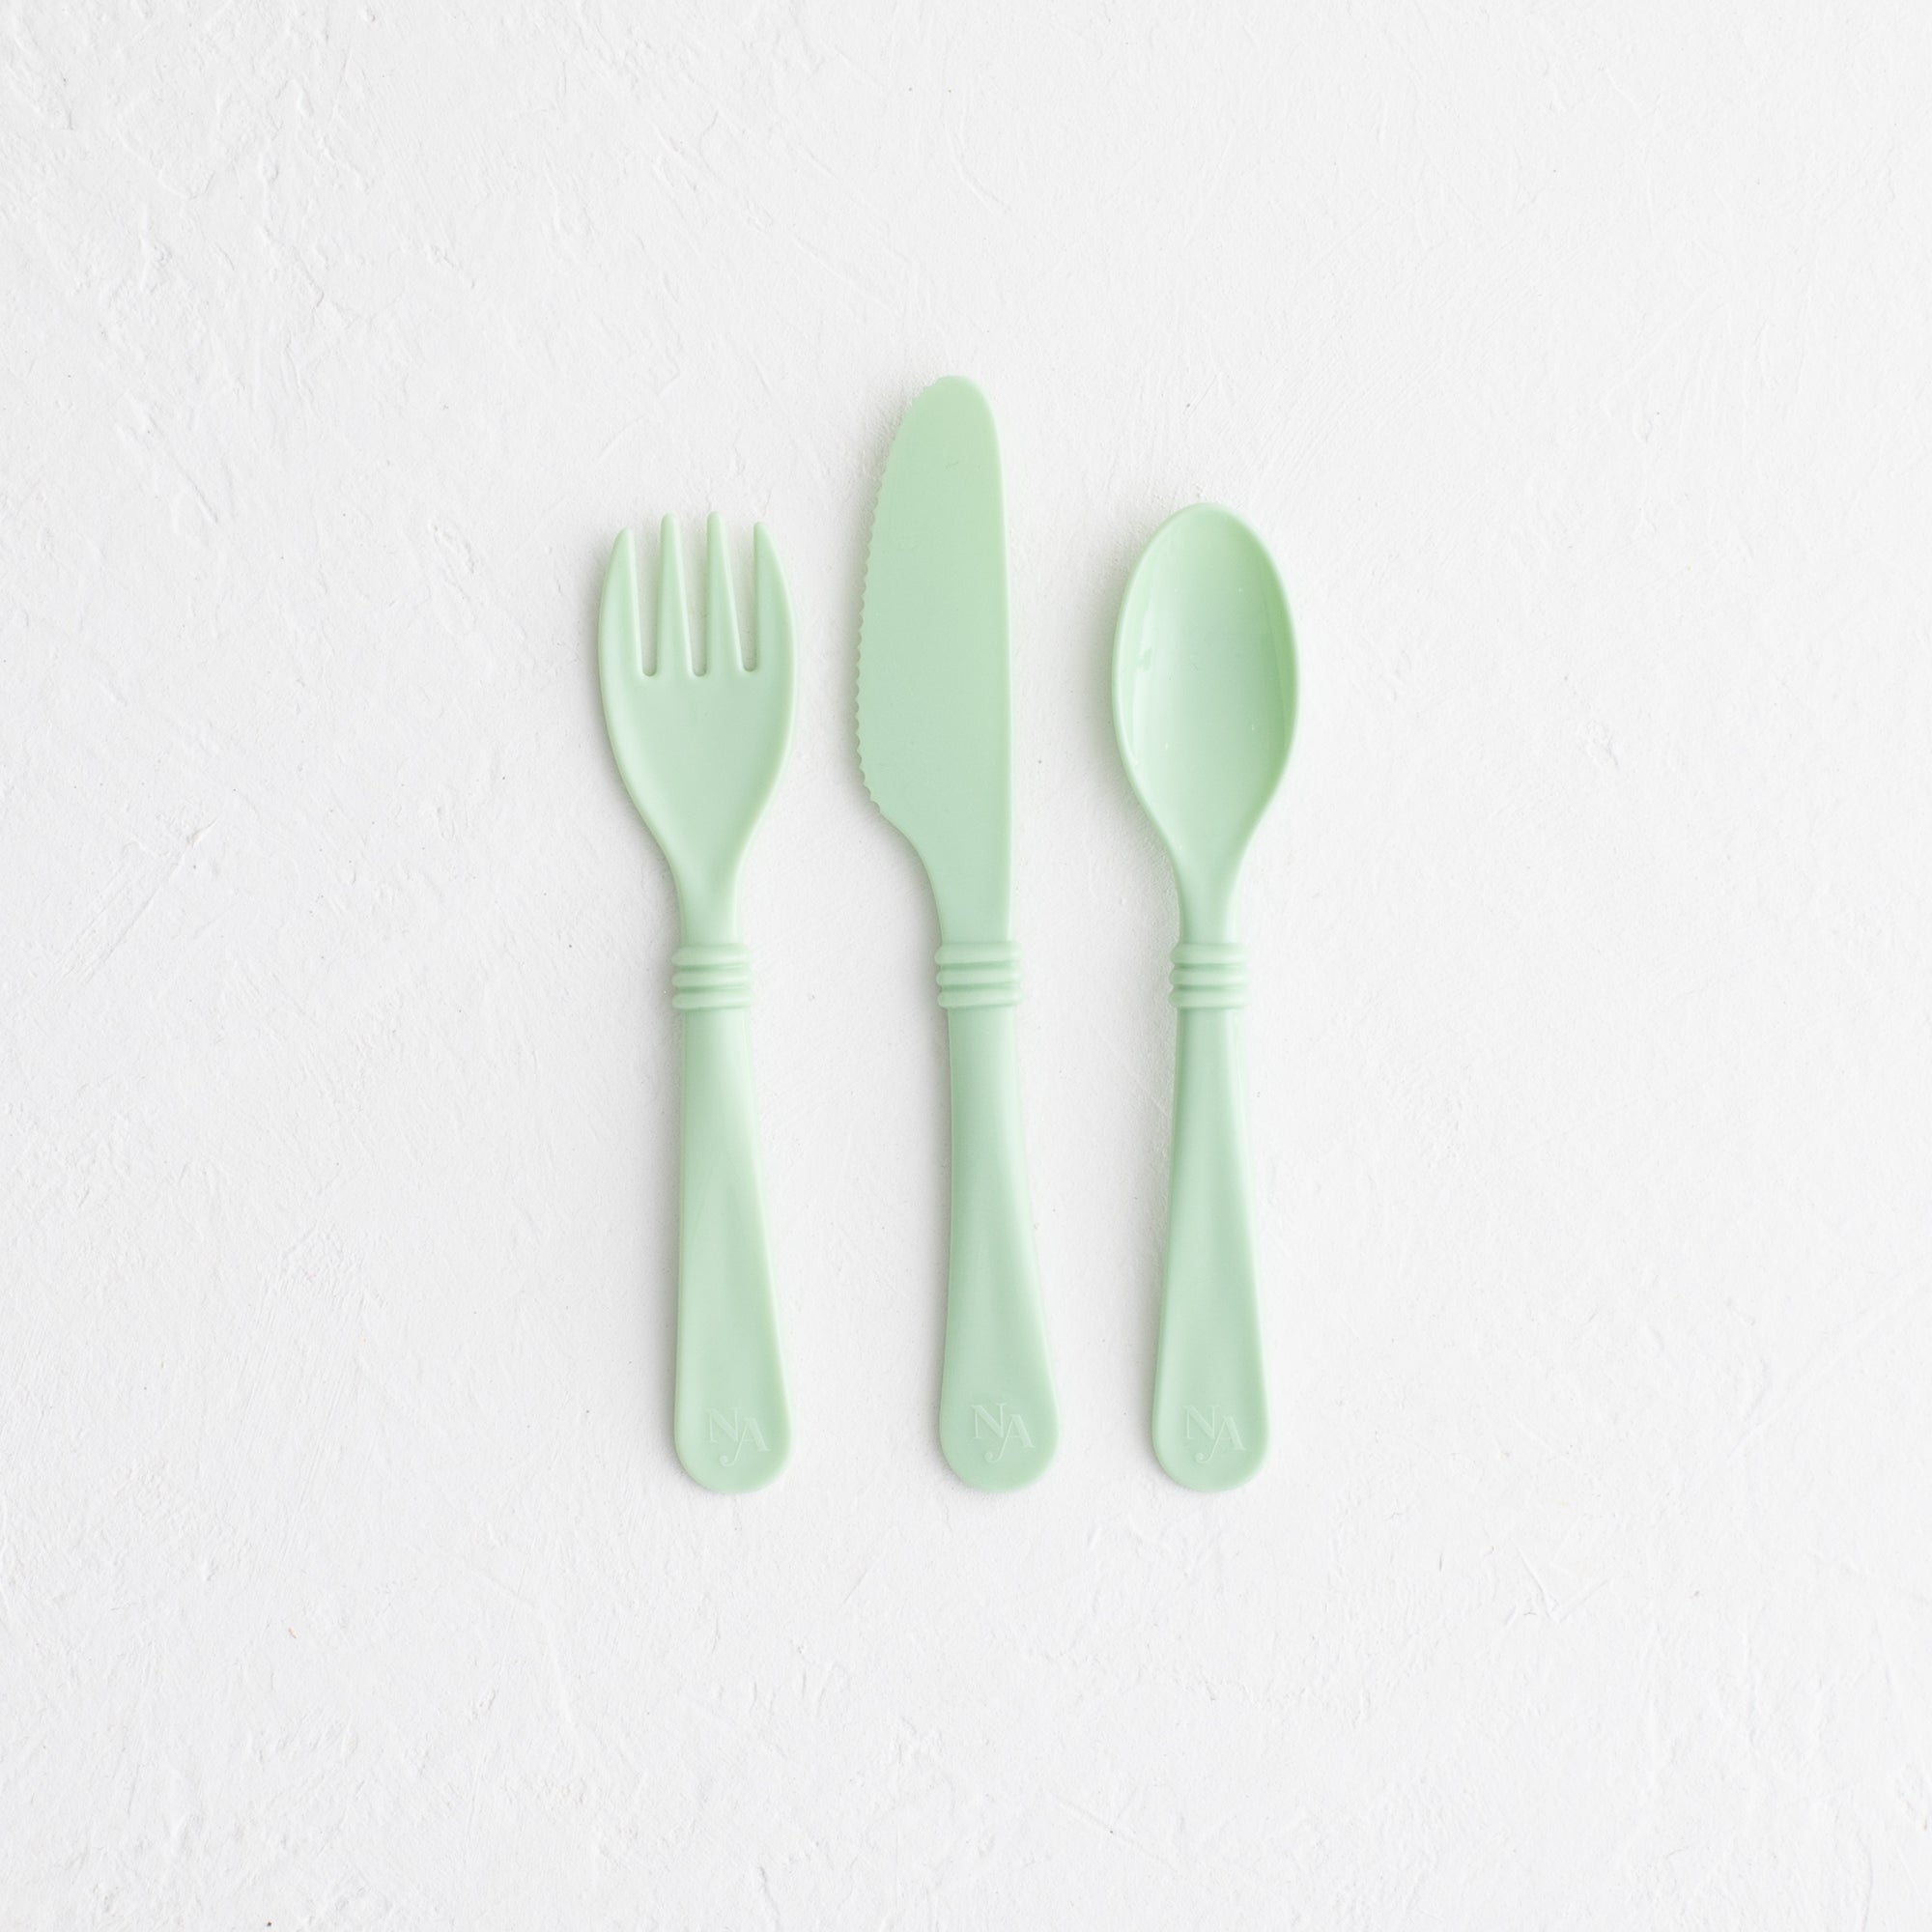 Recycled plastic cutlery set - eco-friendly utensils for sustainable dining.